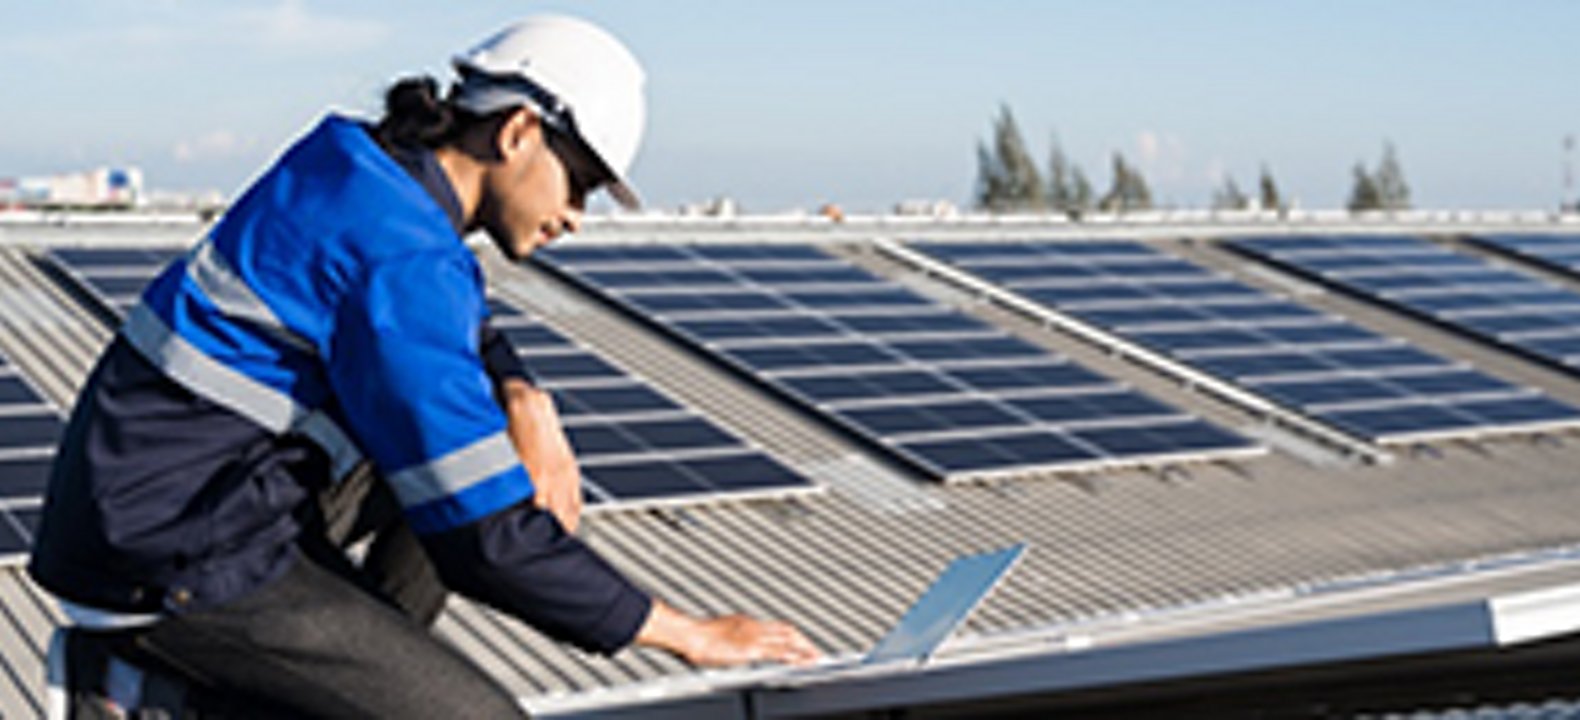 Man in blue vest with white hard hat works on device outside next to solar panels